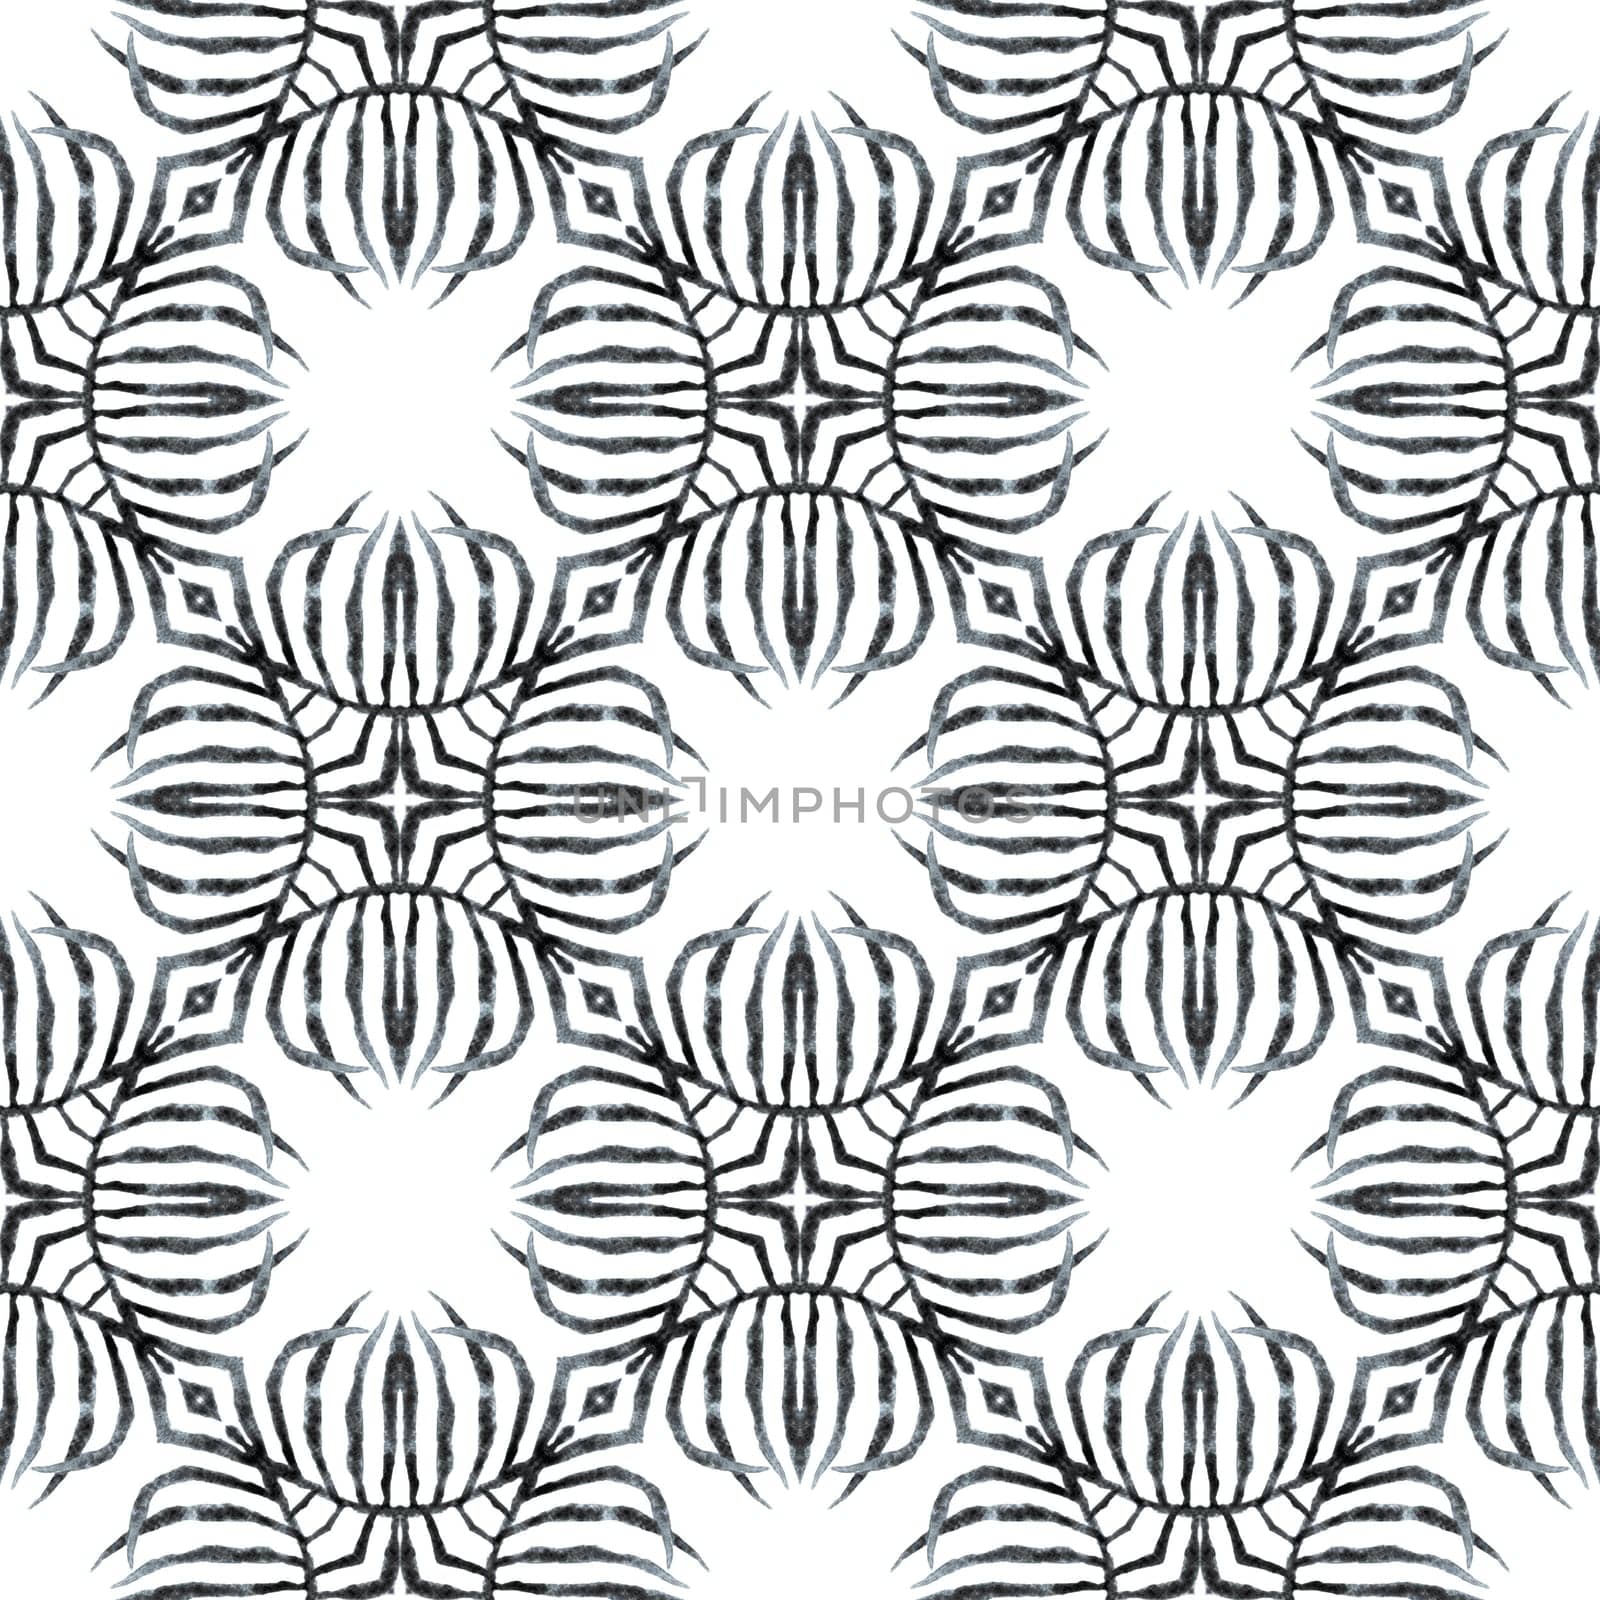 Watercolor summer ethnic border pattern. Black and white brilliant boho chic summer design. Textile ready quaint print, swimwear fabric, wallpaper, wrapping. Ethnic hand painted pattern.